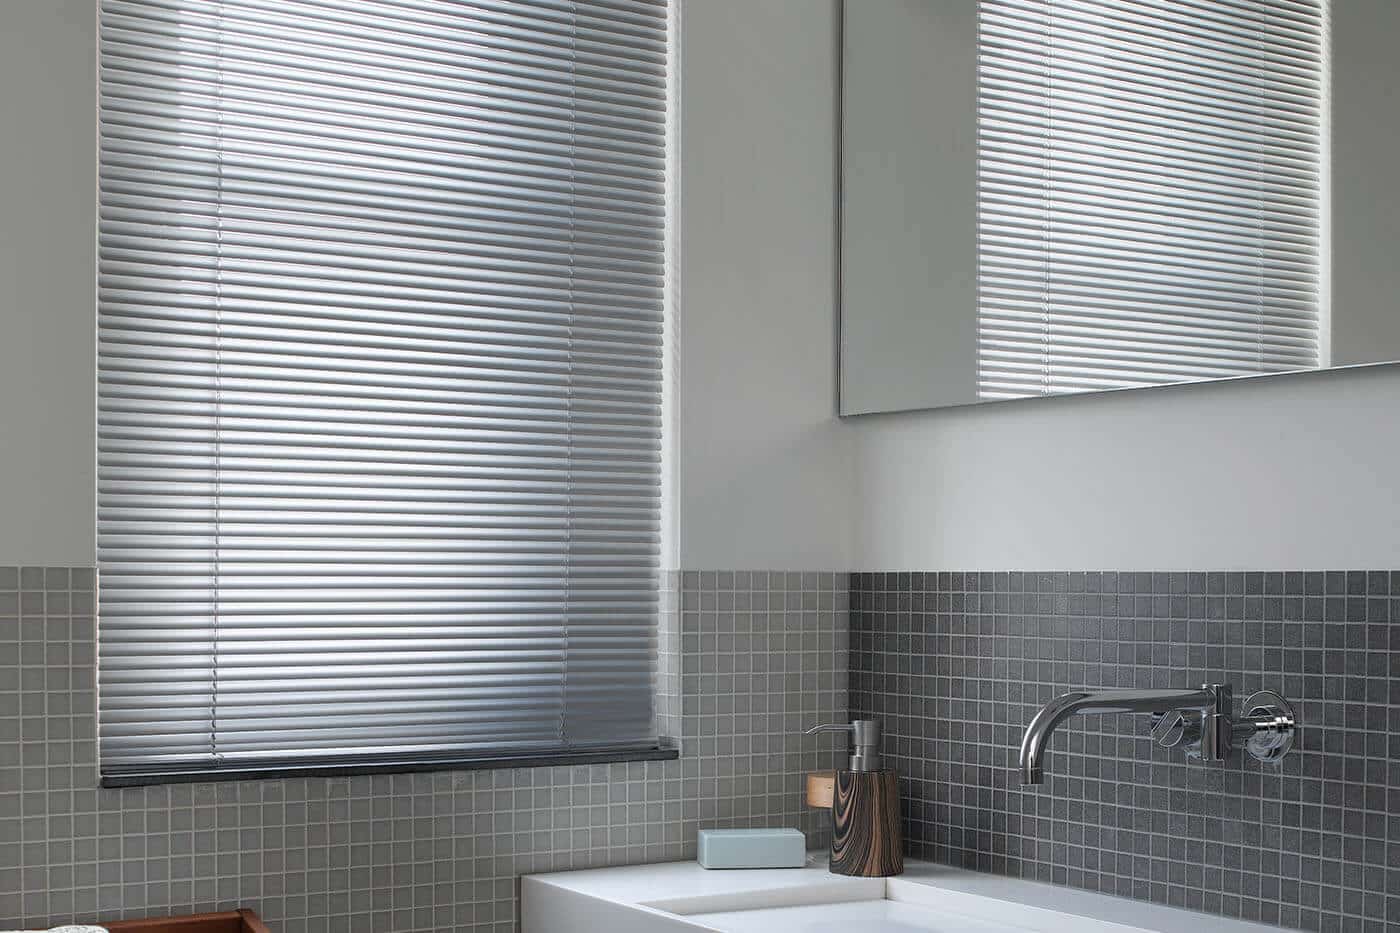 High quality Aluminium Venetian Blinds allowing natural sun light and privacy control in bathroom. Available in different colours and finishes. Modern and elegant design. For sale in our Sydney showroom.